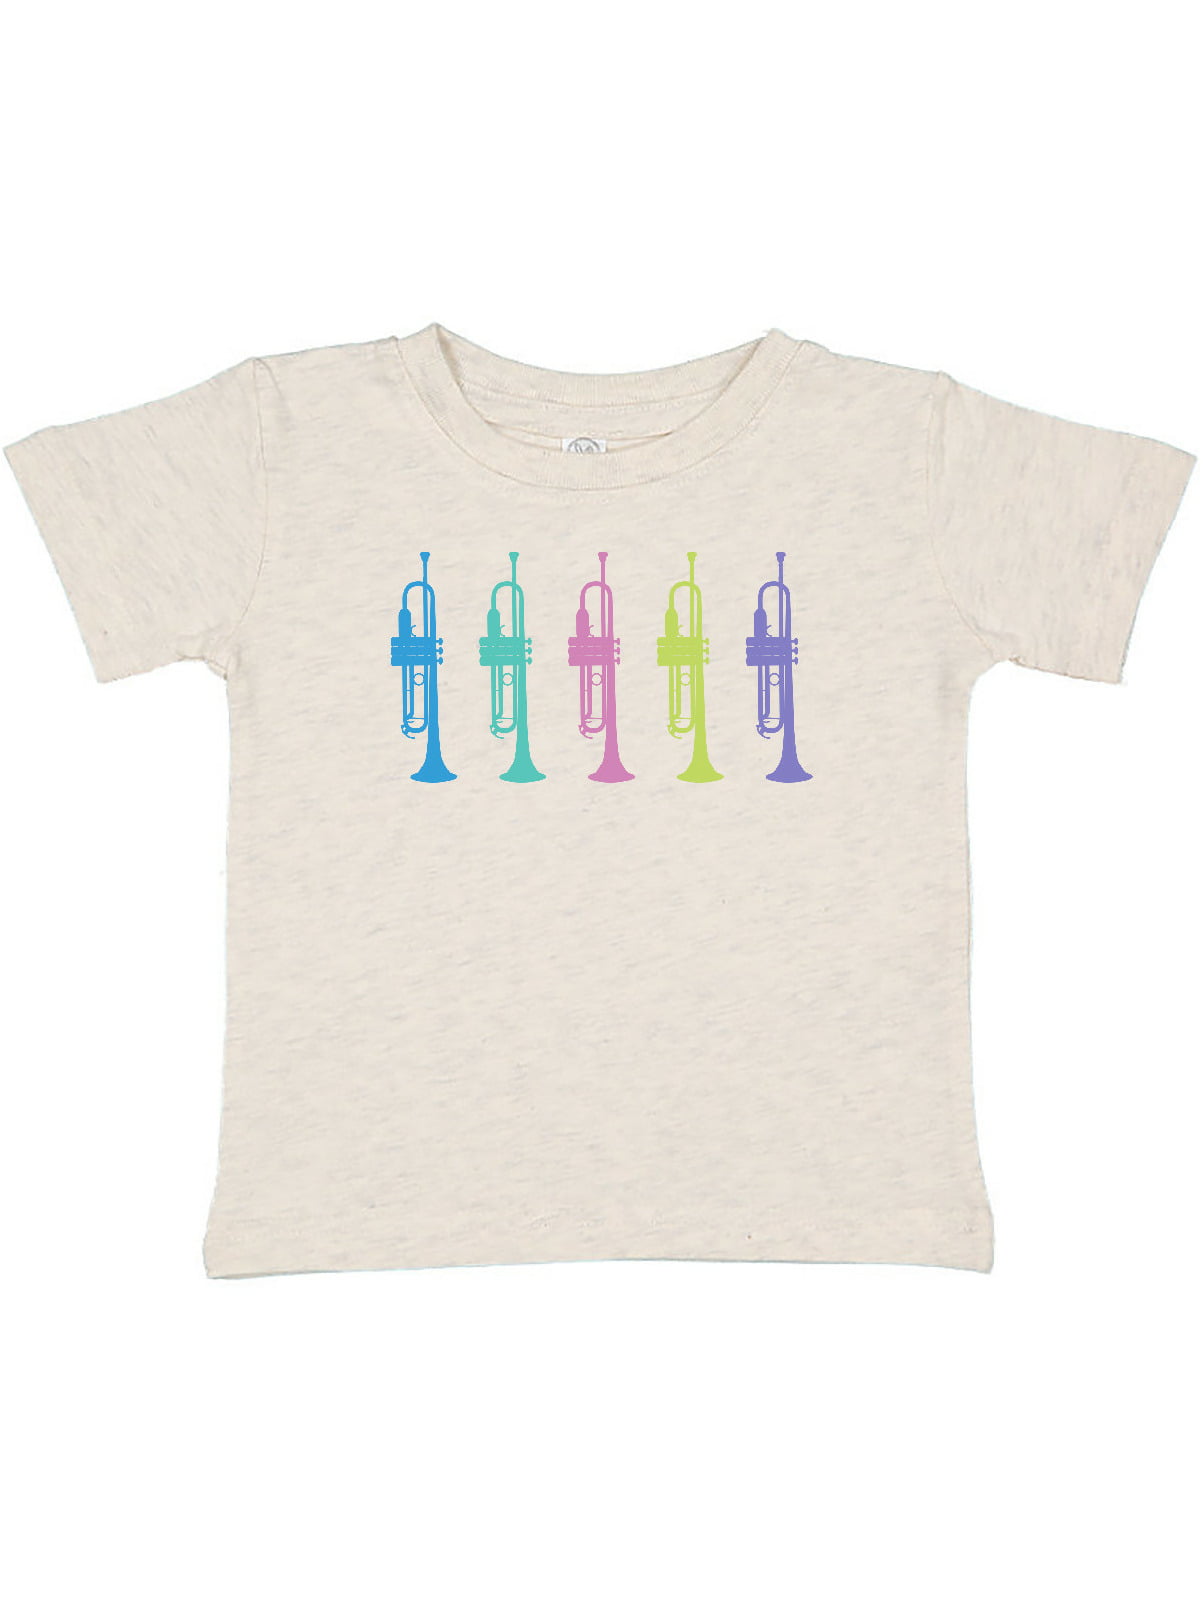 inktastic Cute Trumpet Music Gift Baby T-Shirt 